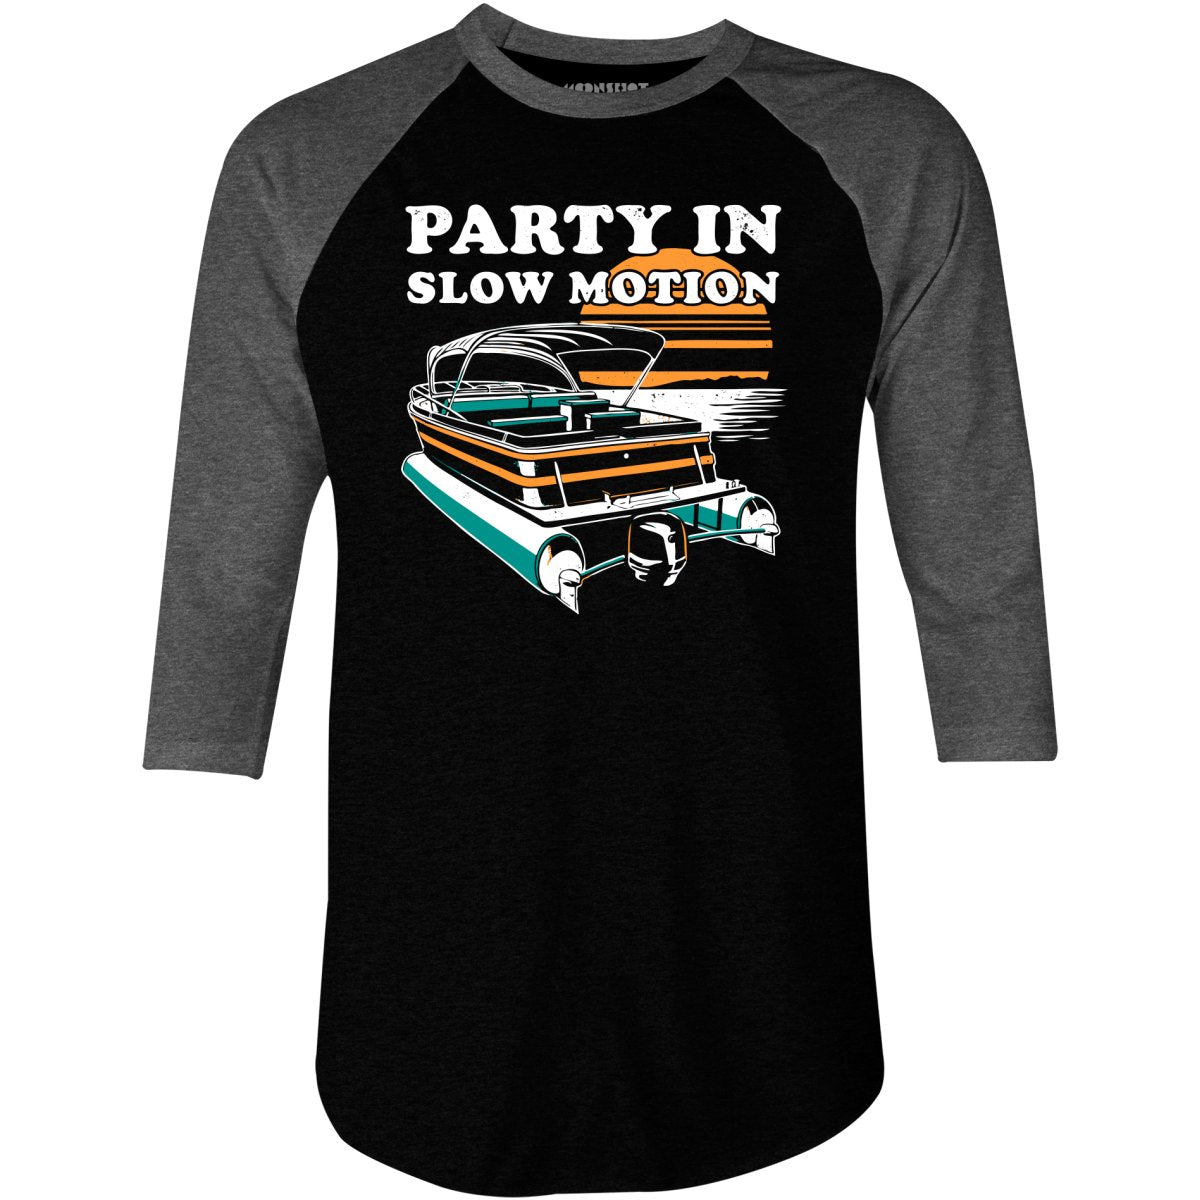 Party in Slow Motion - 3/4 Sleeve Raglan T-Shirt